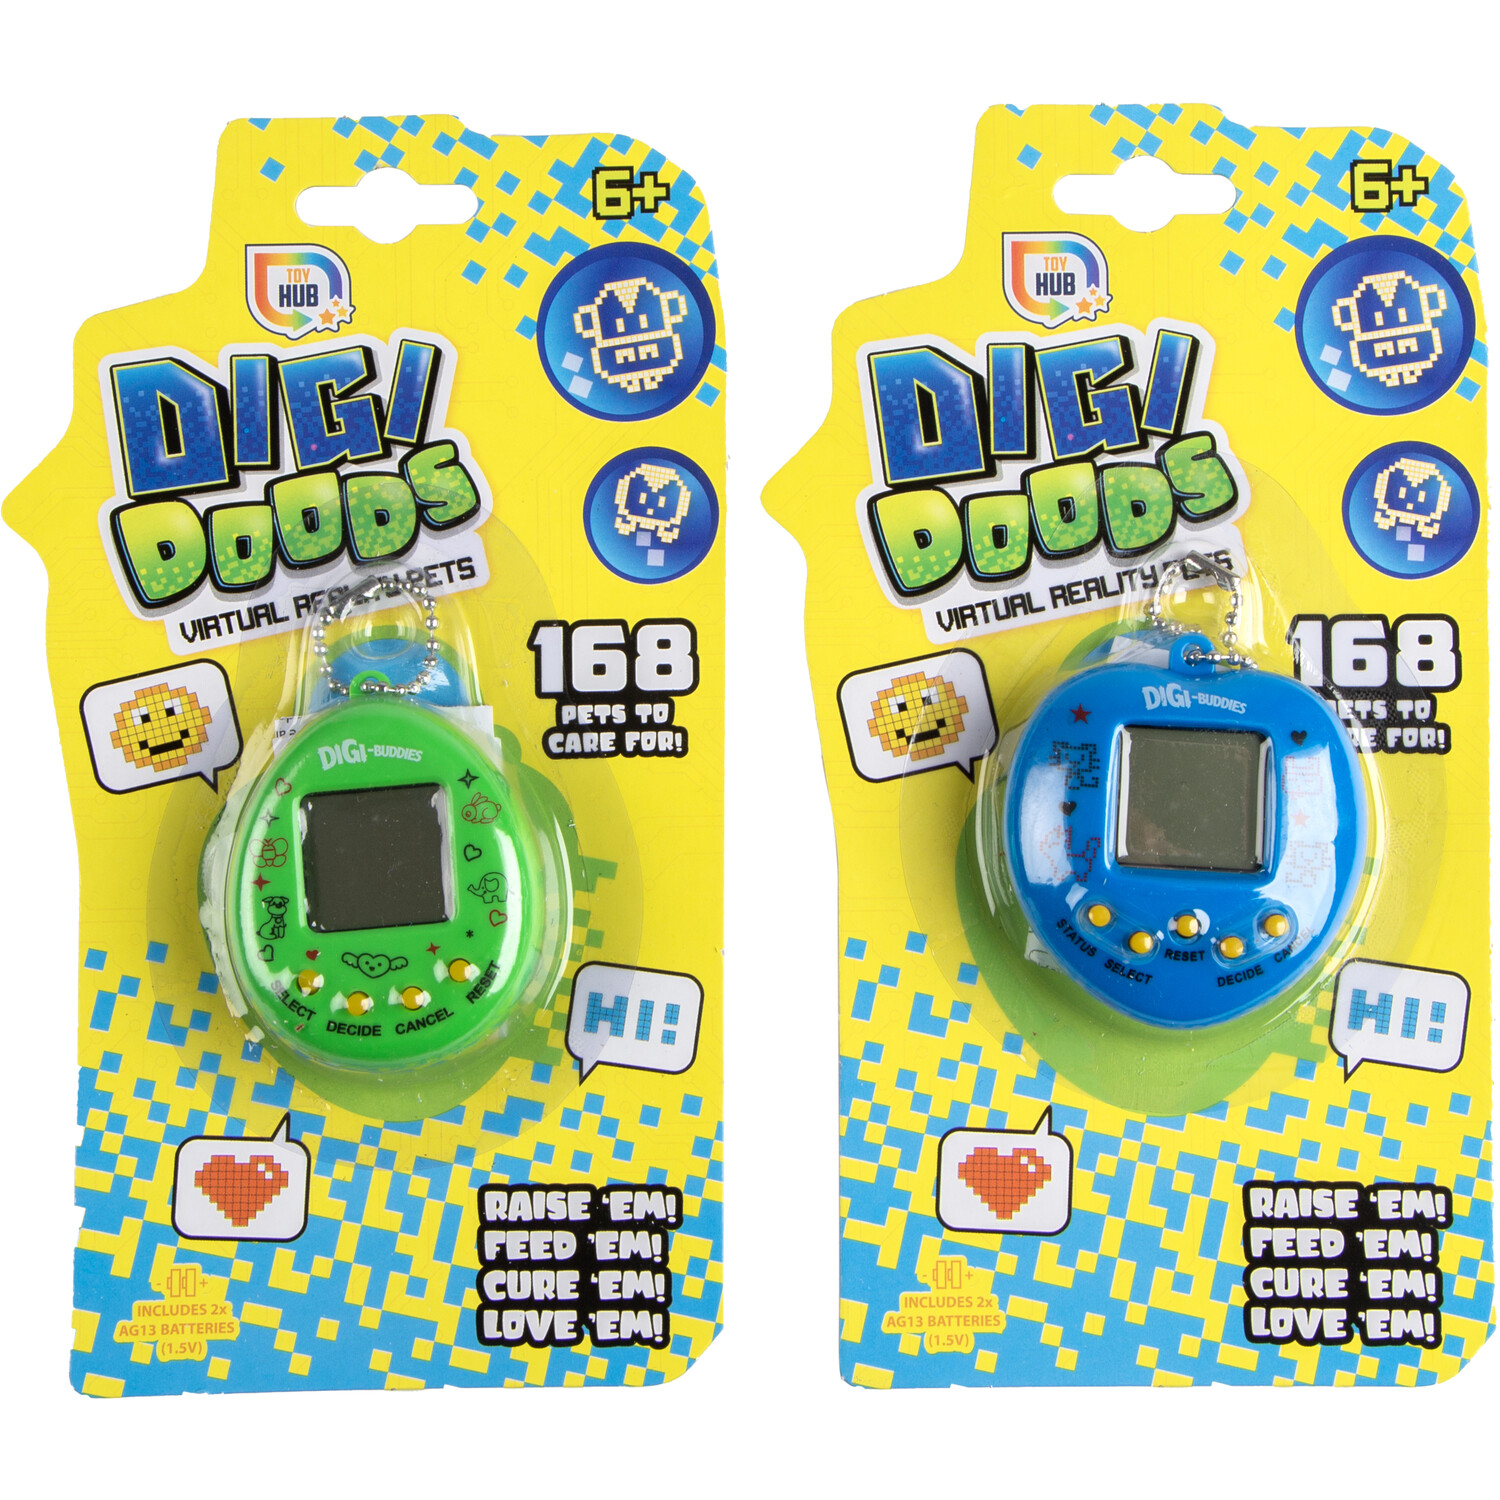 Single Toy Hub Digi Doods Virtual Reality Pets Toy in Assorted styles Image